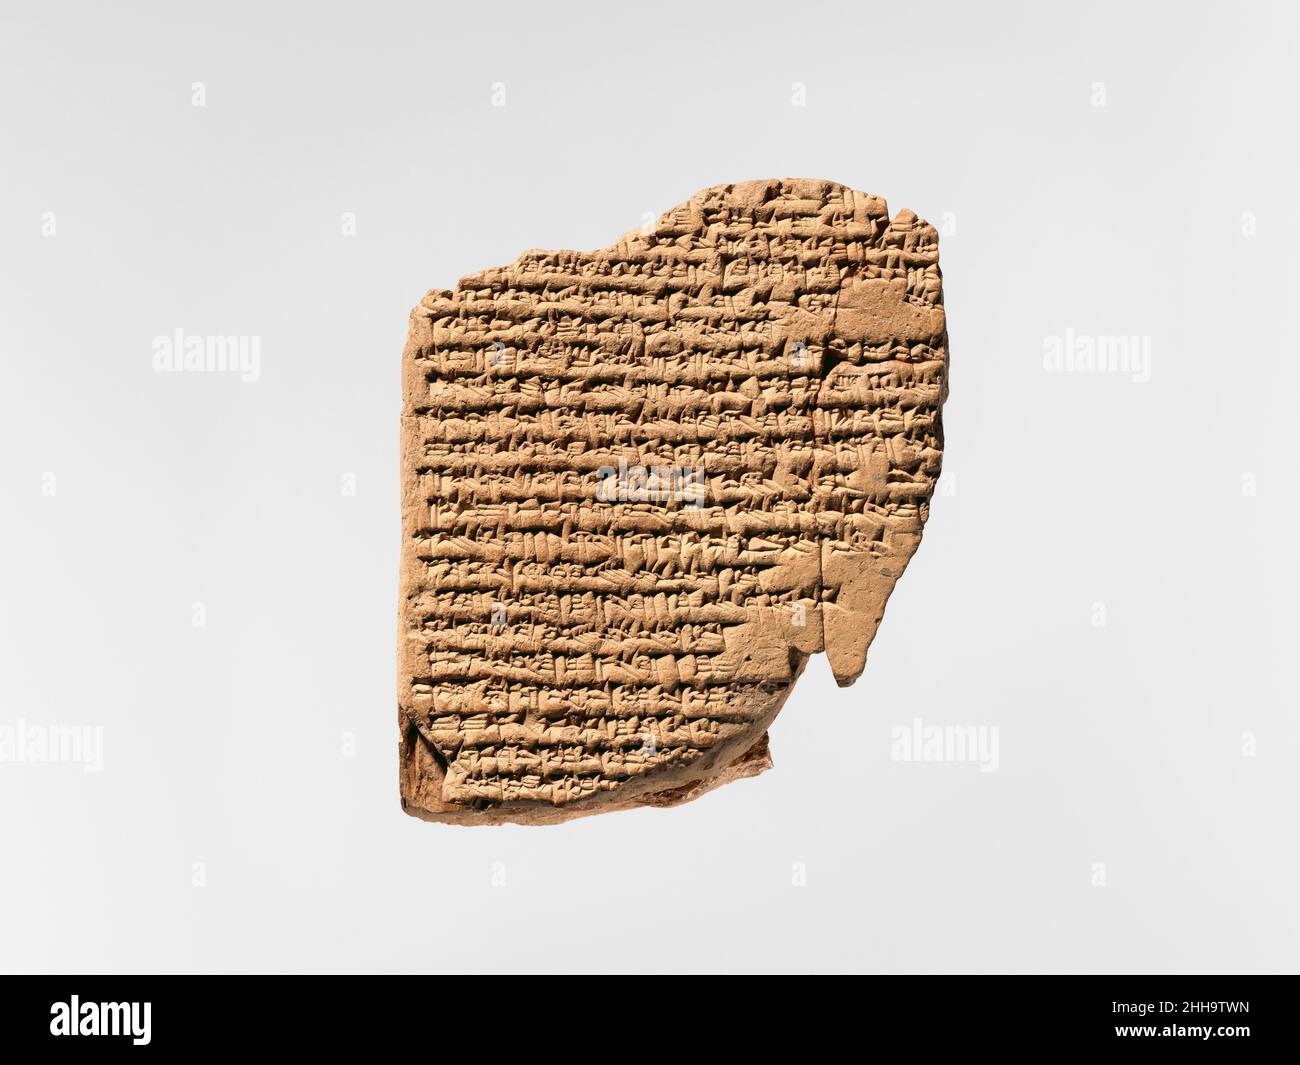 Cuneiform tablet: a-she-er gi-ta, balag to Innin/Ishtar ca. 2nd–1st century B.C. Seleucid or Parthian This cuneiform tablet records part of a balag, a song of lament that accompanied a stringed instrument. The text is typical of the Seleucid period, where the words are written in Sumerian but with a large number of lines accompanied by an Akkadian translation. Sumerian was the language spoken in southern Mesopotamia until around 2000 B.C., while Akkadian had probably ceased to be a spoken language by the time this tablet was written, having been replaced by Aramaic and Greek throughout much of Stock Photo